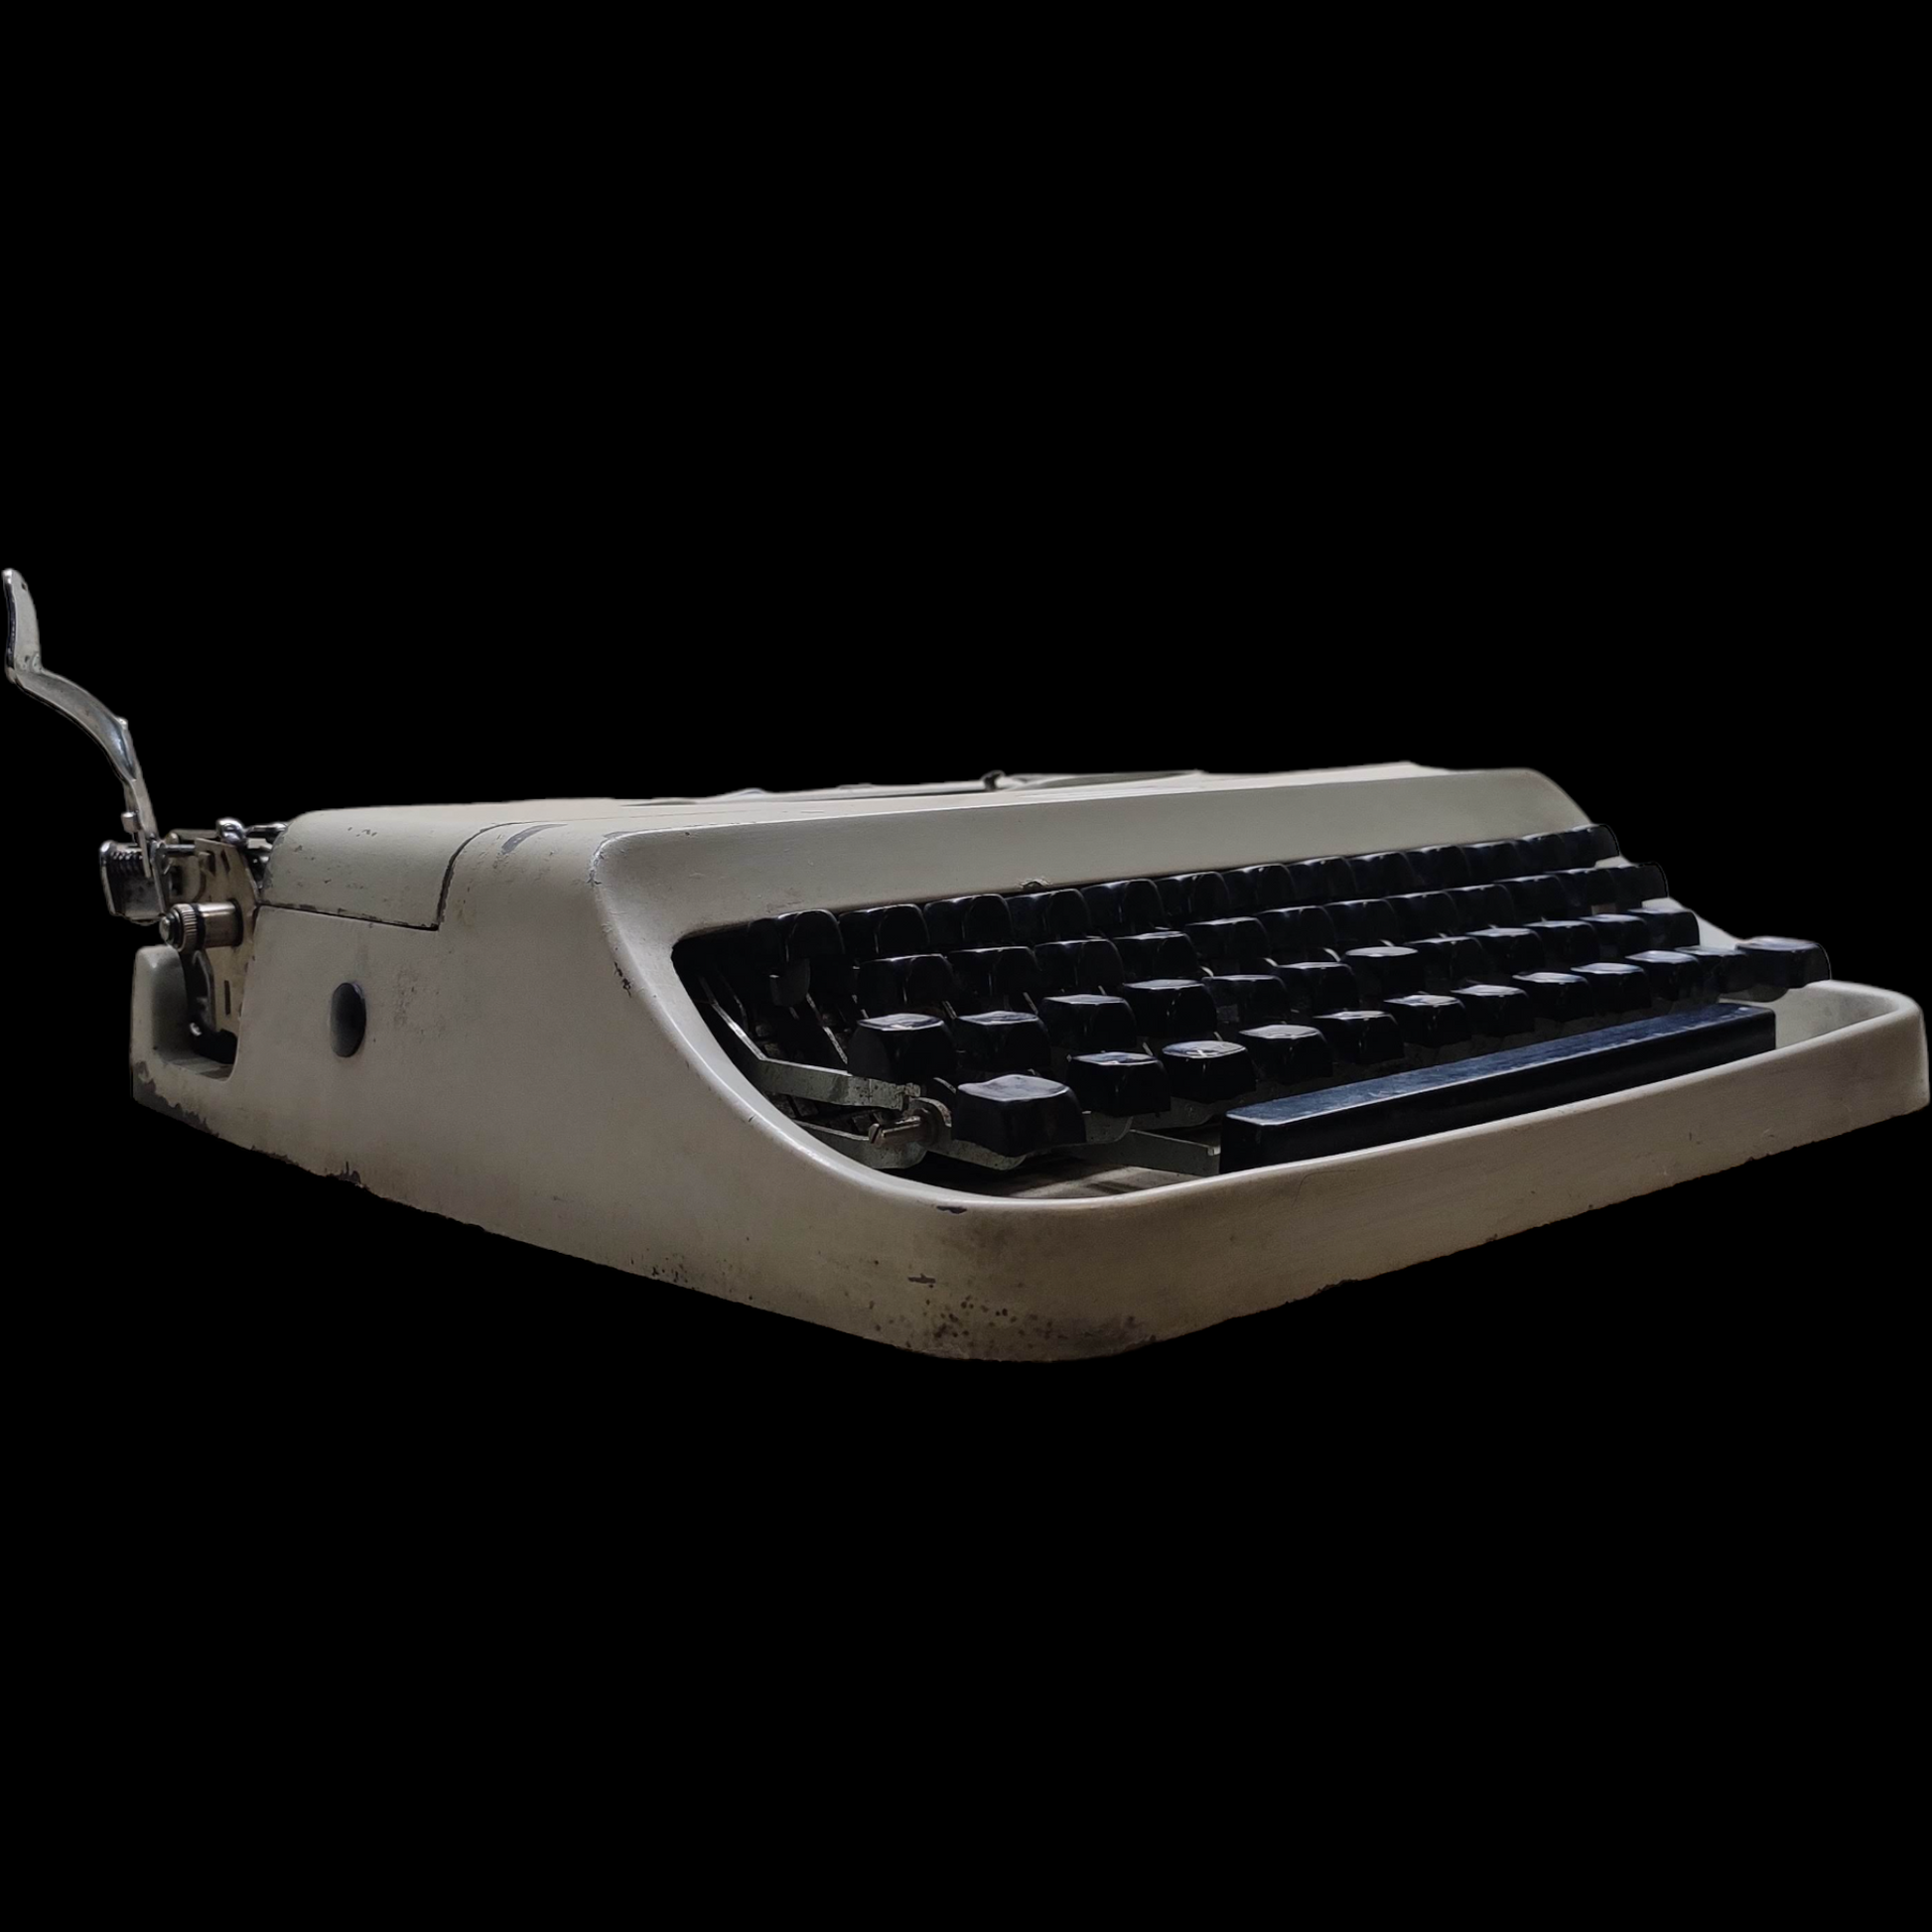 Image of Underwood 18 Typewriter. Available from universaltypewritercompany.in.